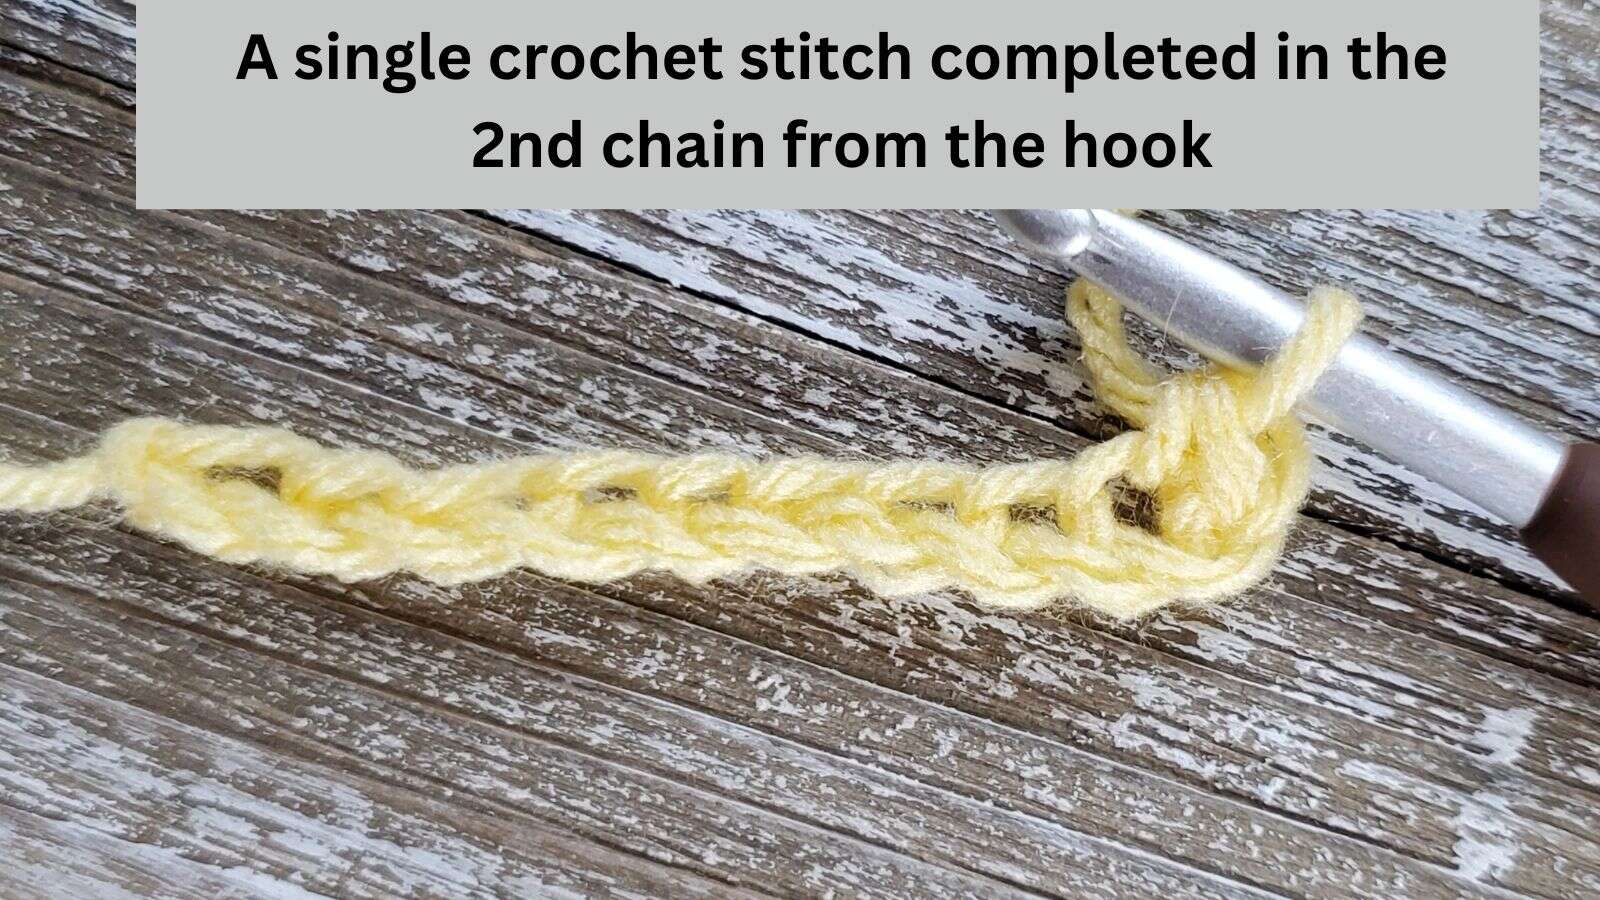 a completed single crochet stitch in the 2nd chain from the hook on a foundation chain